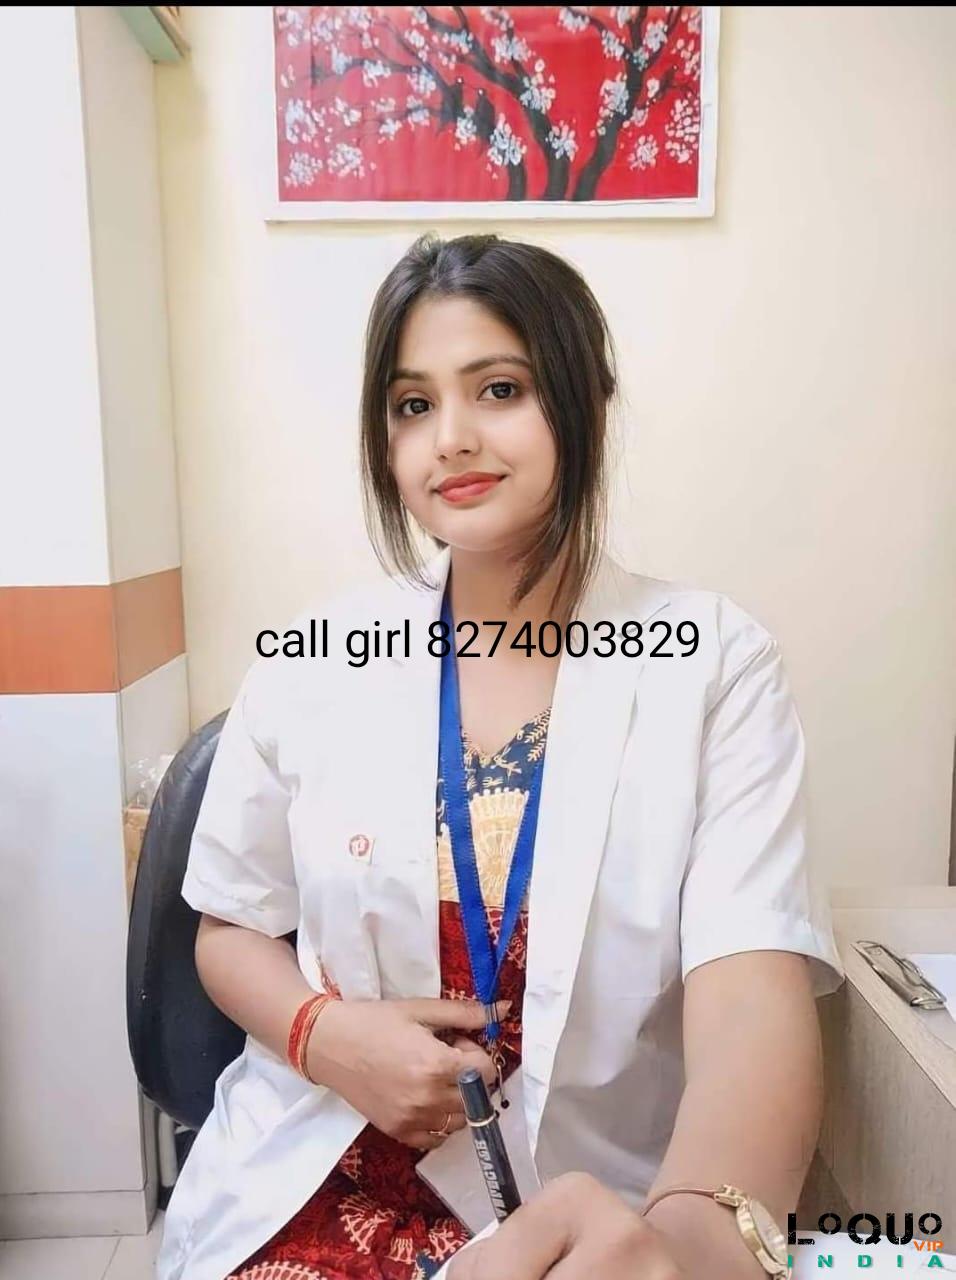 Call Girls Gujarat: Anand ❤CALL GIRL 82740*03829 ❤CALL GIRLS IN Anand ESCORT SERVICE❤CALL GIRL